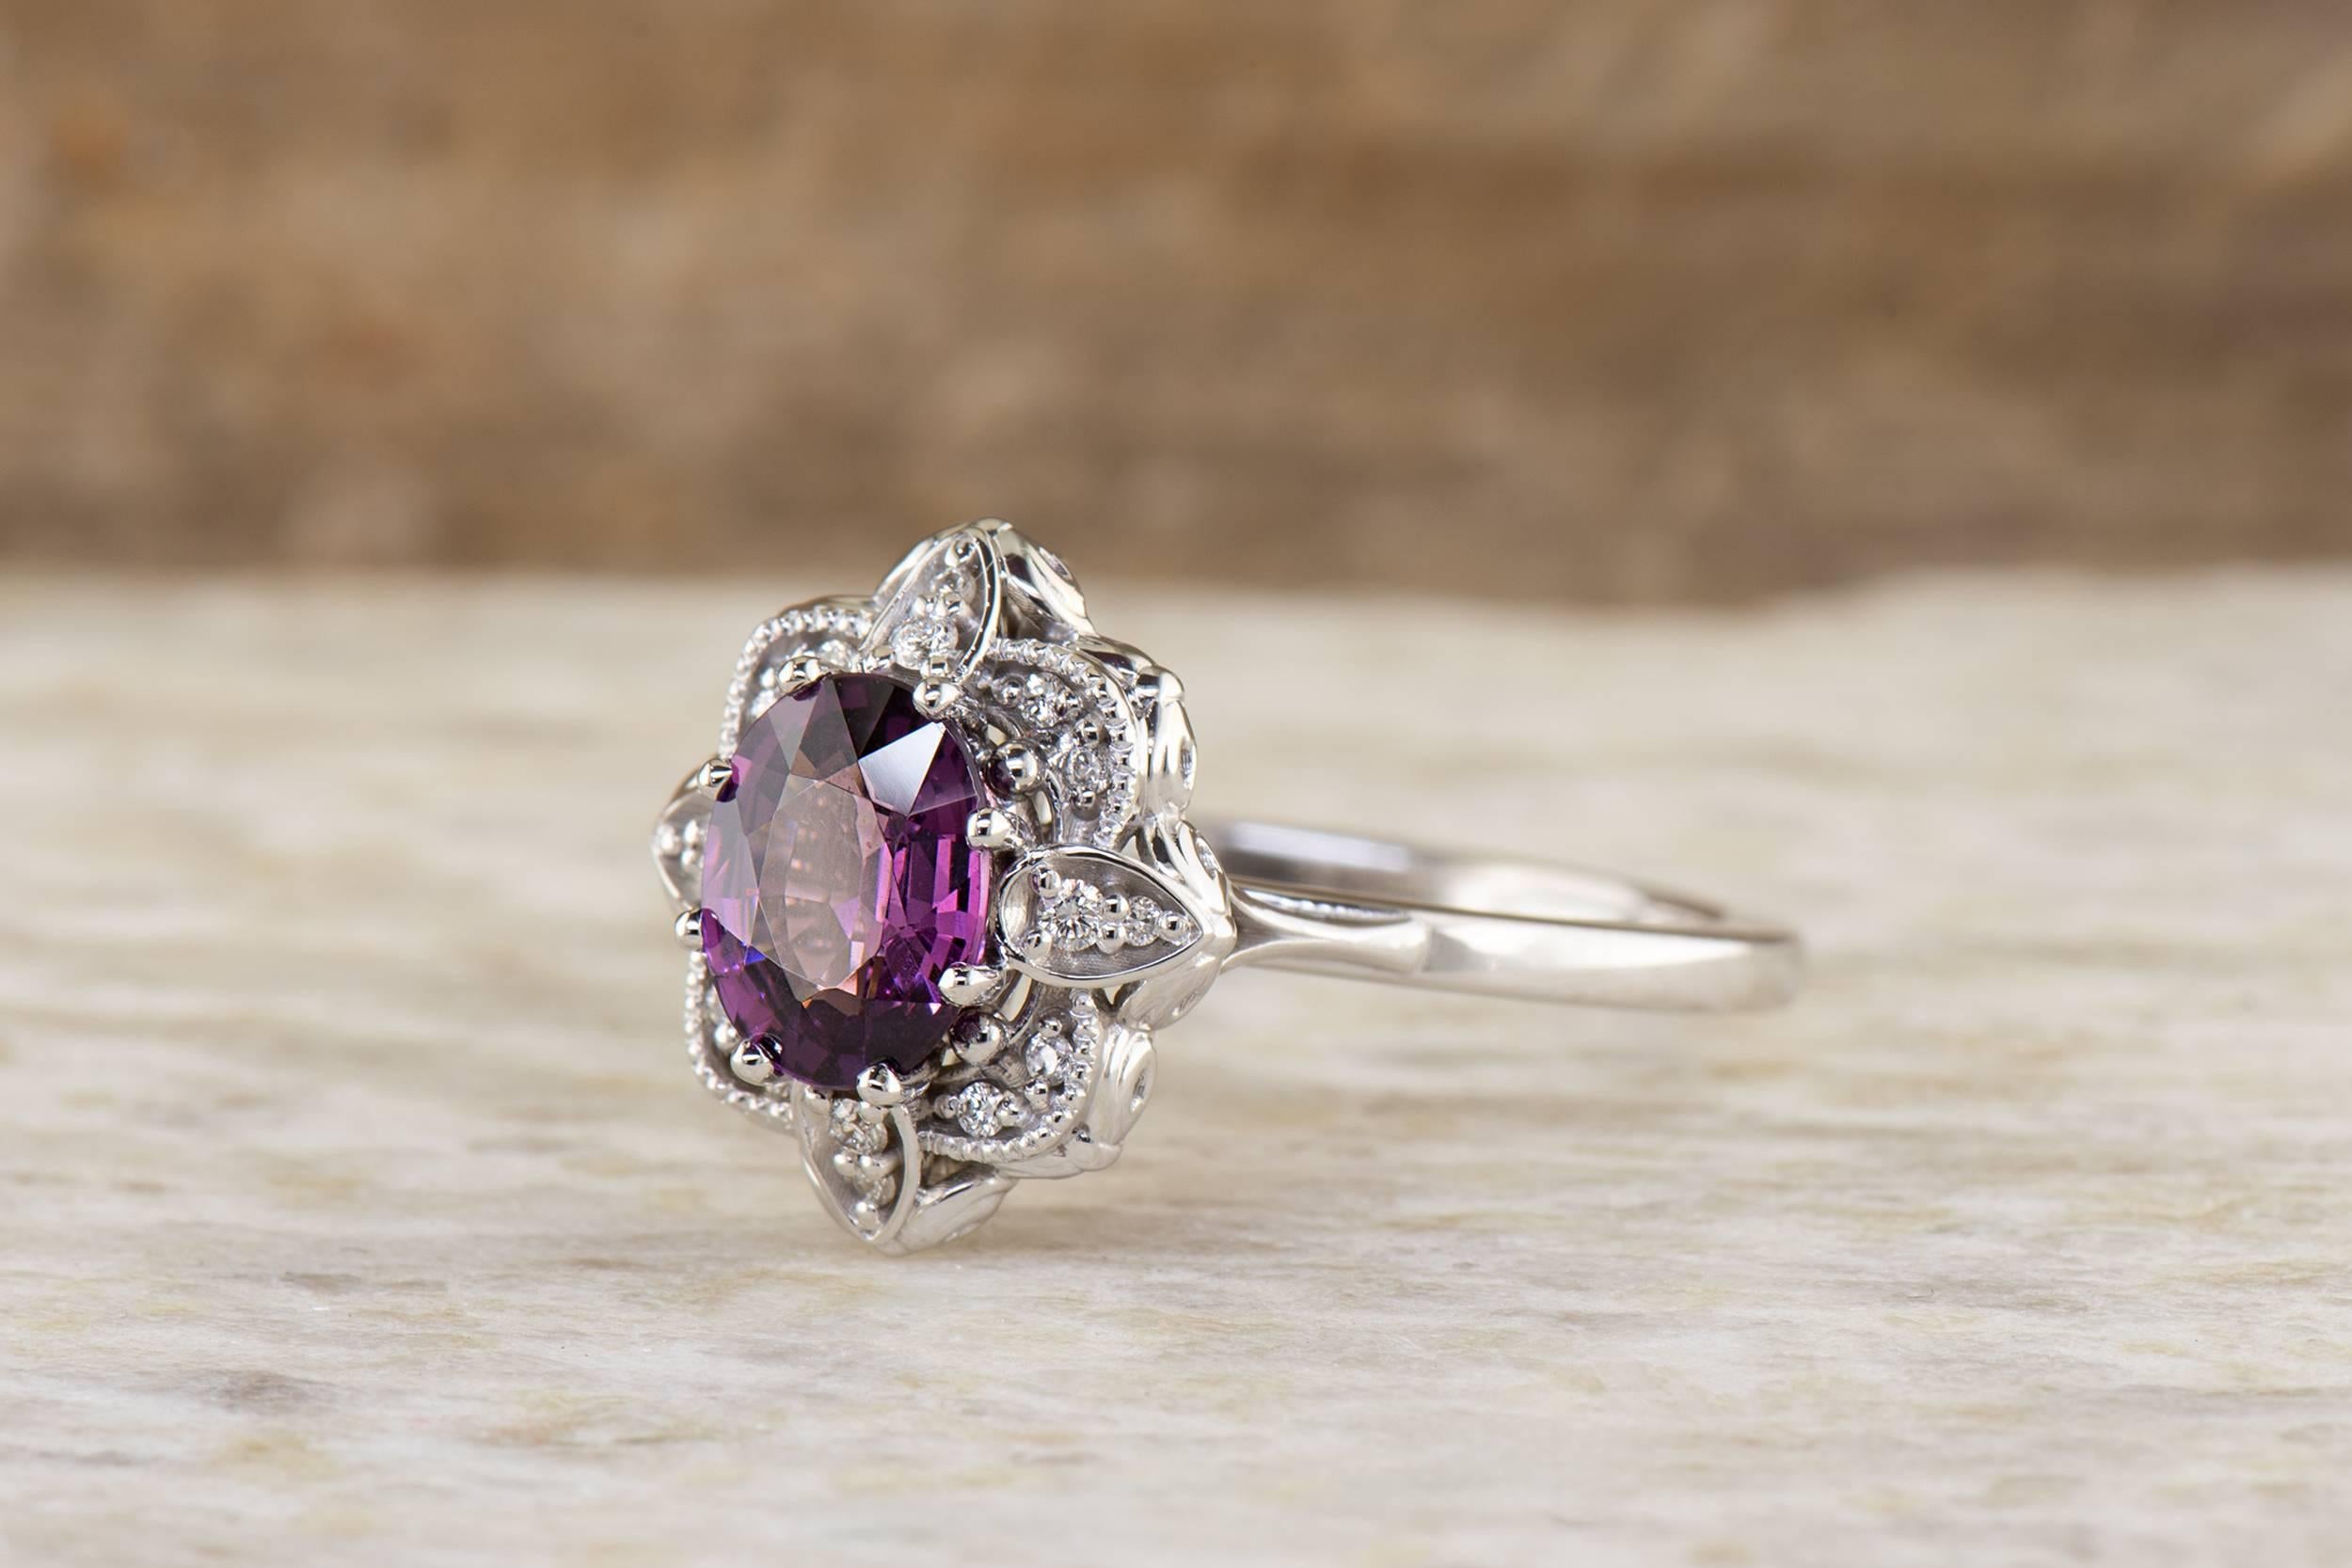 This 14K white gold ring shines with beautiful floral and vintage design elements. In the center is a 1.31 carat oval faceted grape garnet. In the midst of all of the milgrain and floral design work is 0.11 carat total weight diamonds.